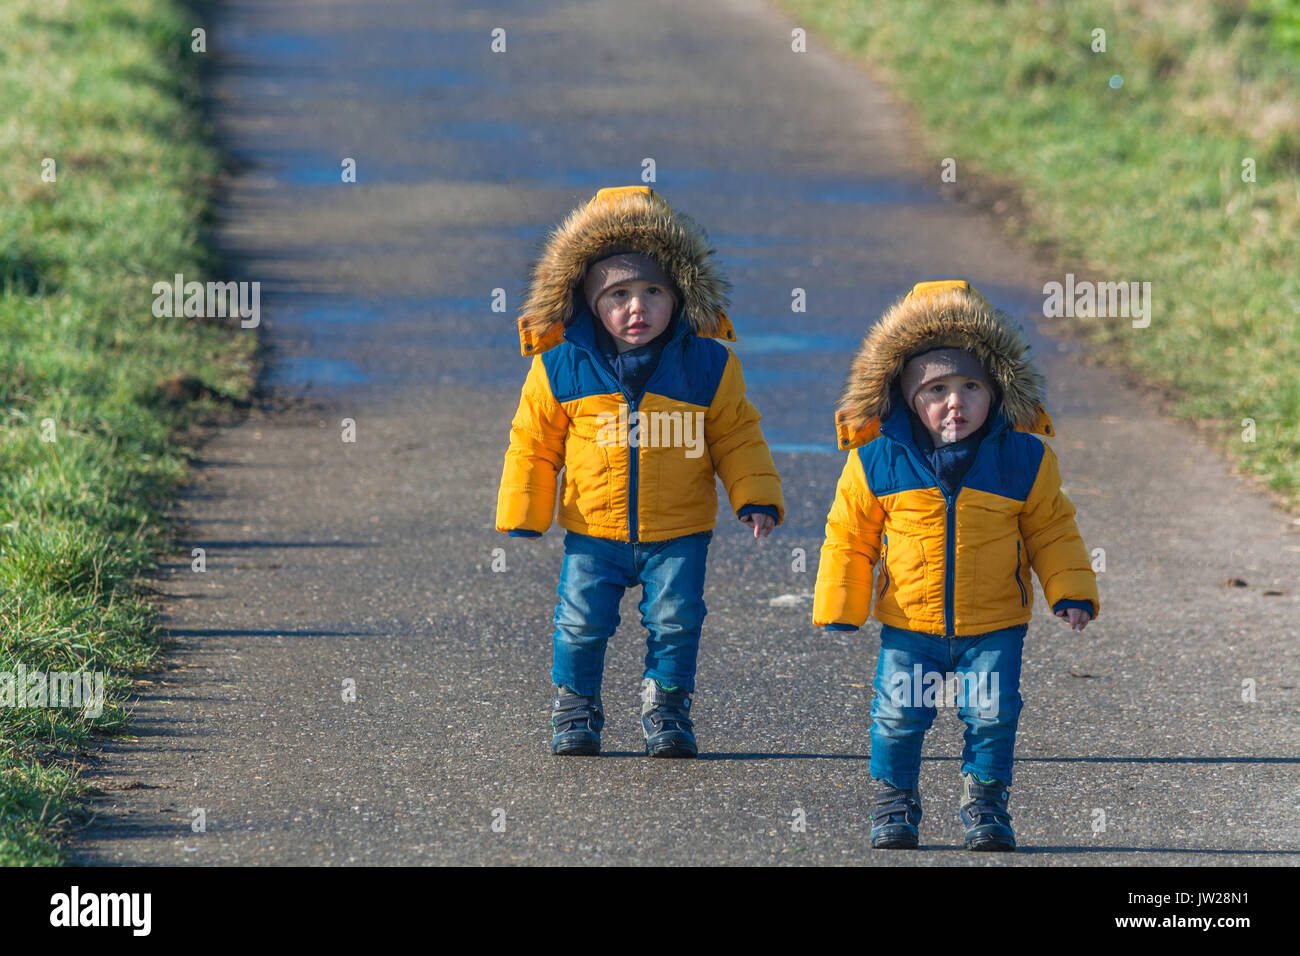 Two small children, twins walking on a country road and looking amazed at the camera. Stock Photo